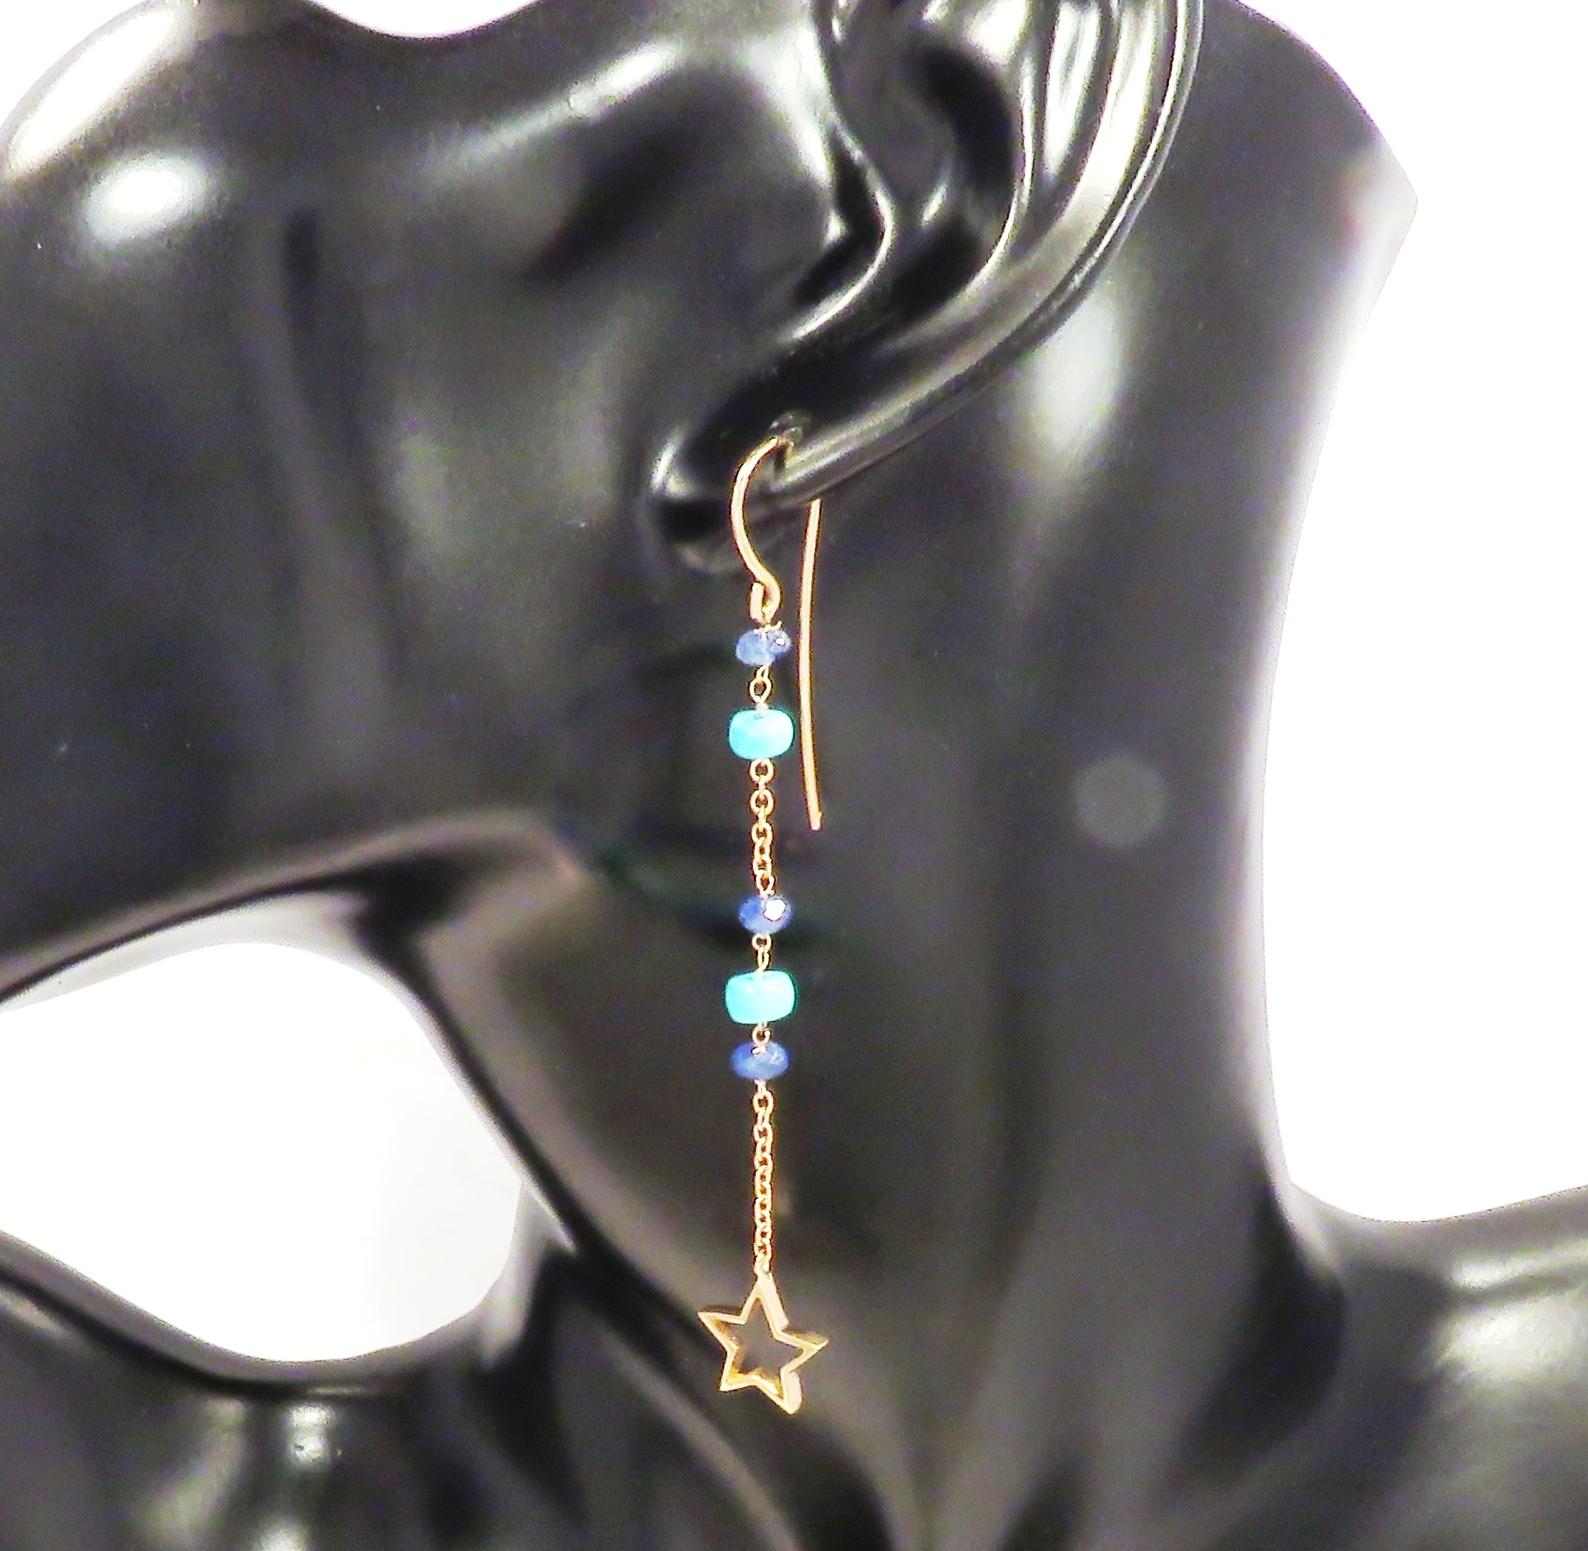 Dangle earrings with natural sapphires and genuine blue turquoises featuring a star charm. Each earring is handcrafted in 9 karat rose gold with 4 nugget cut sapphires and 3 nugget cut turquoises. This pair of earrings has different length: one